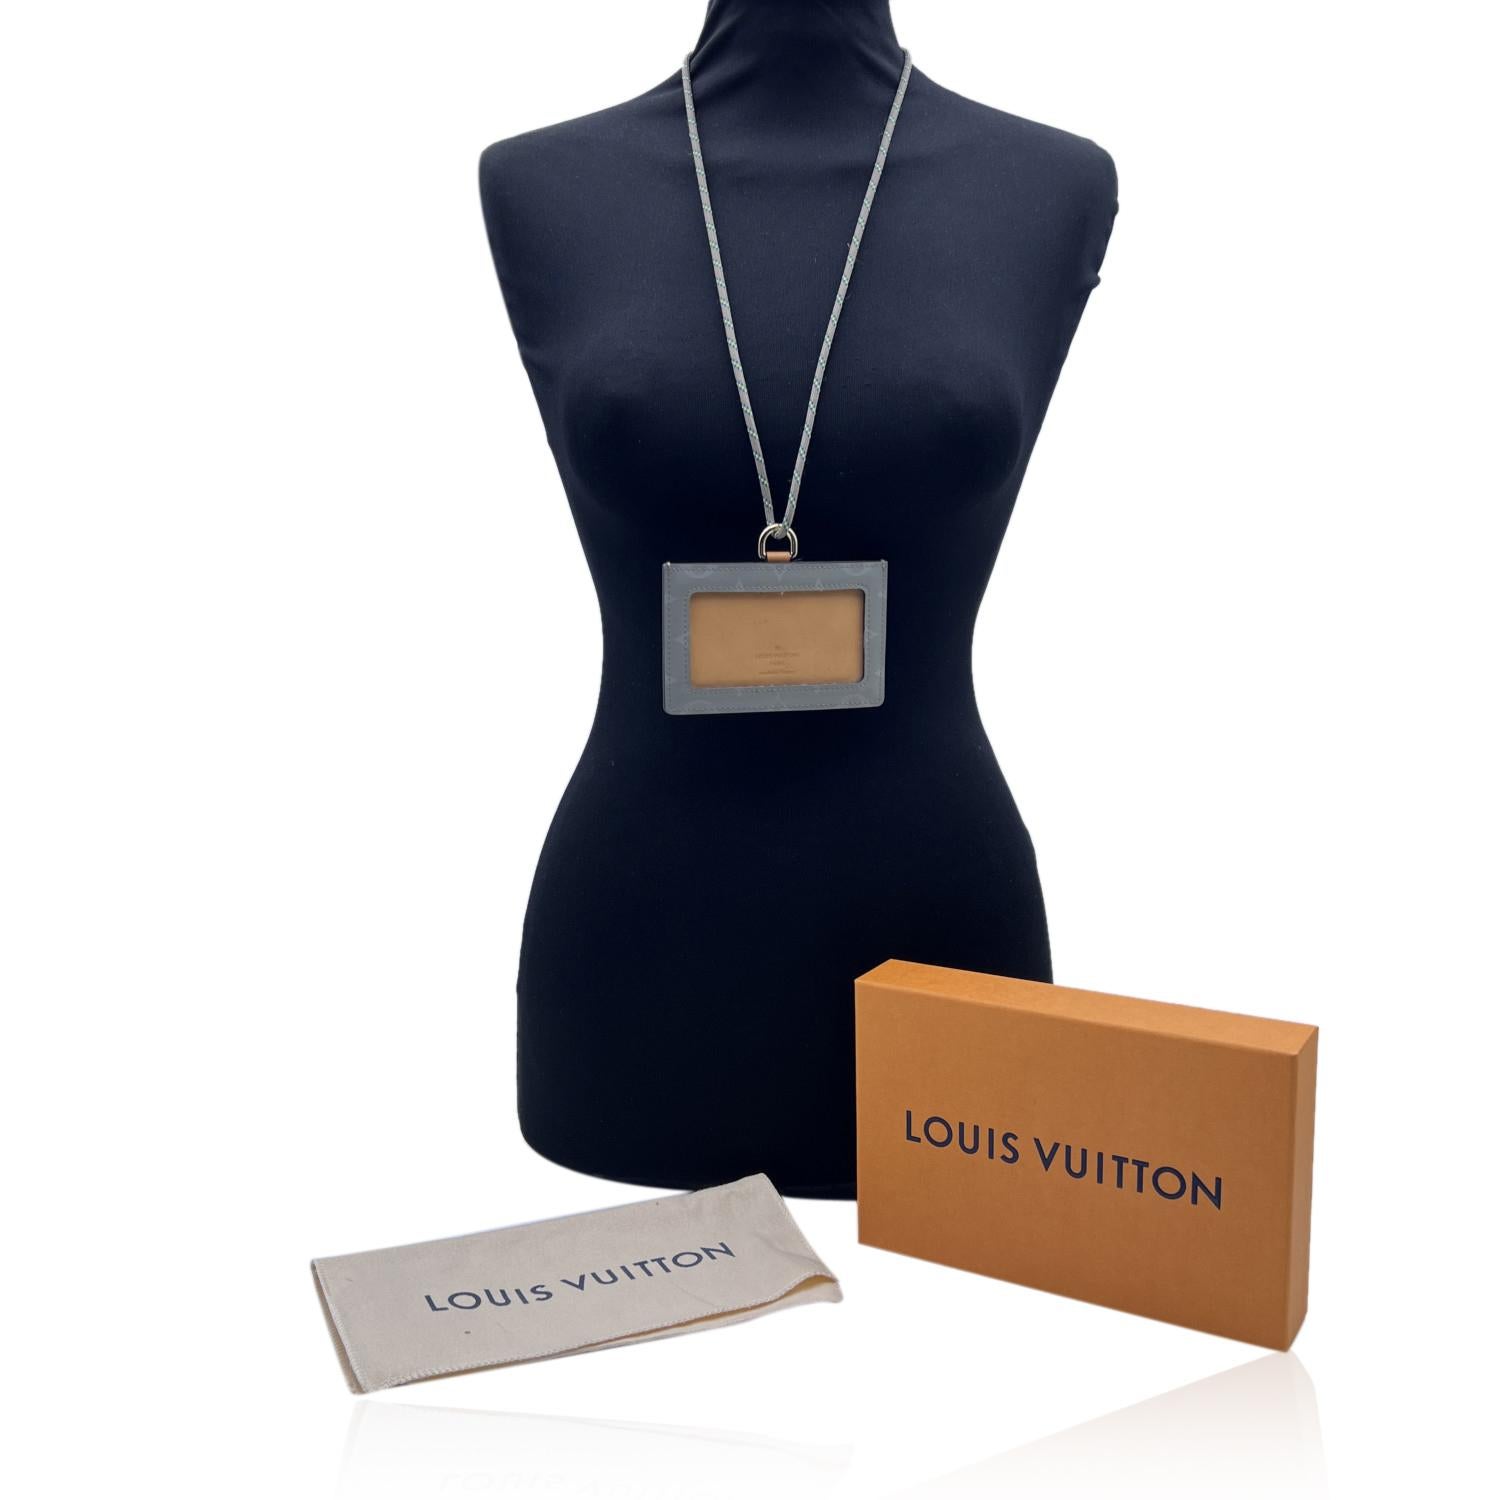 Louis Vuitton 'Cosmos' badge and card holder made of Titanium grey canvas and beige leather. The model is equipped with 2 compartments in which to store your documents with order and safety. It features a removable cord to wear around the neck.